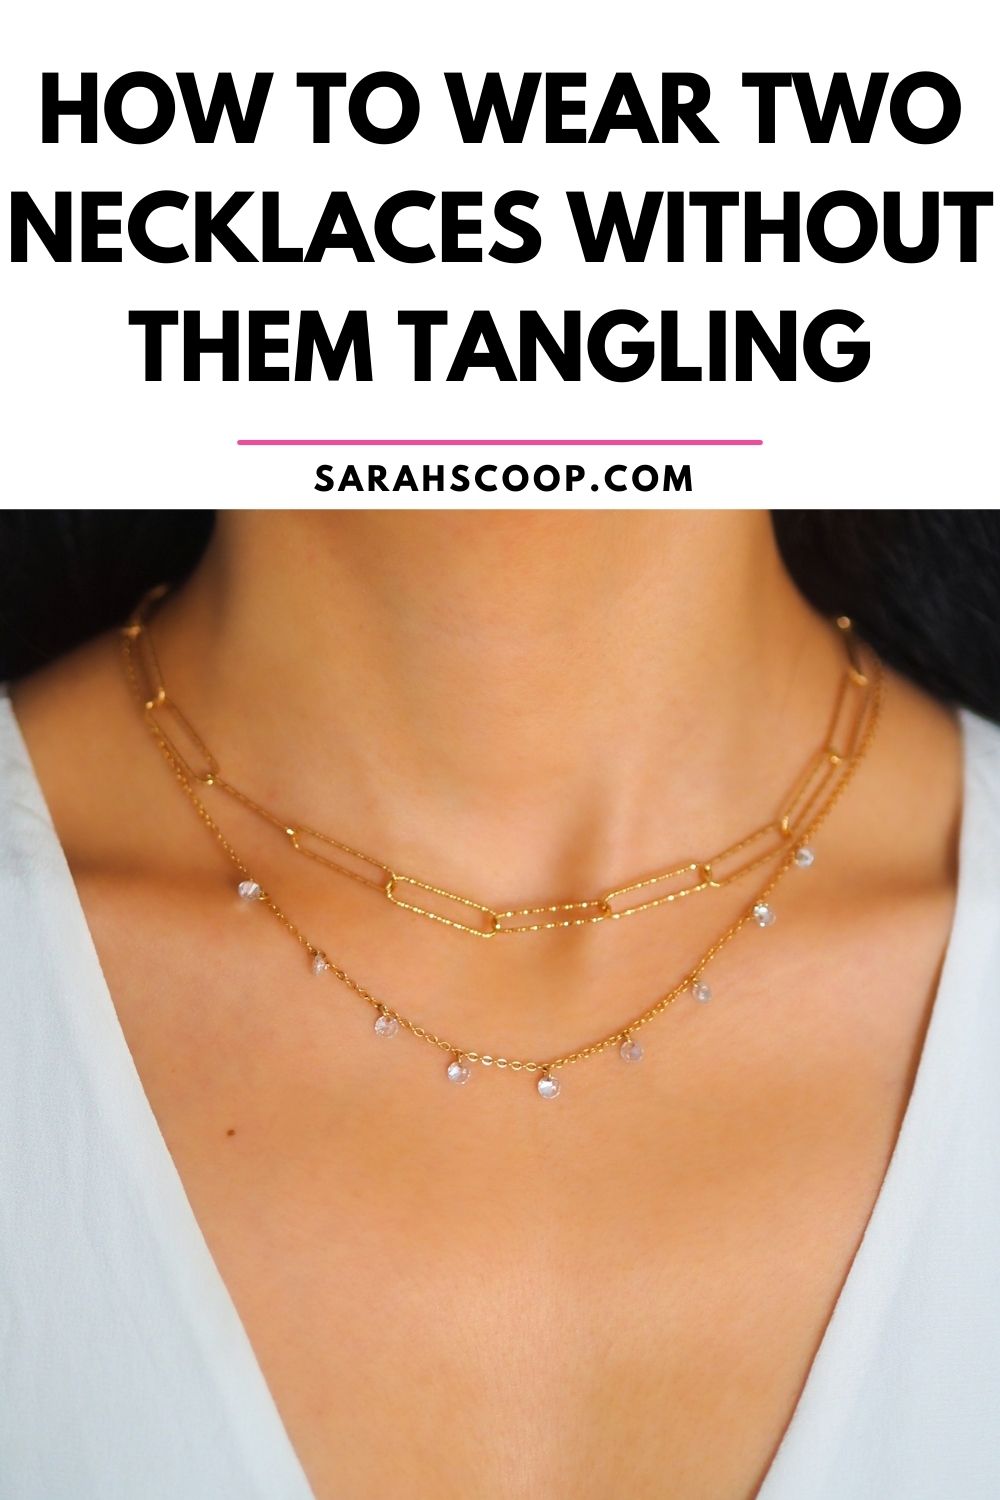 How To Store Necklaces Without Tangling - Blinging Wisely